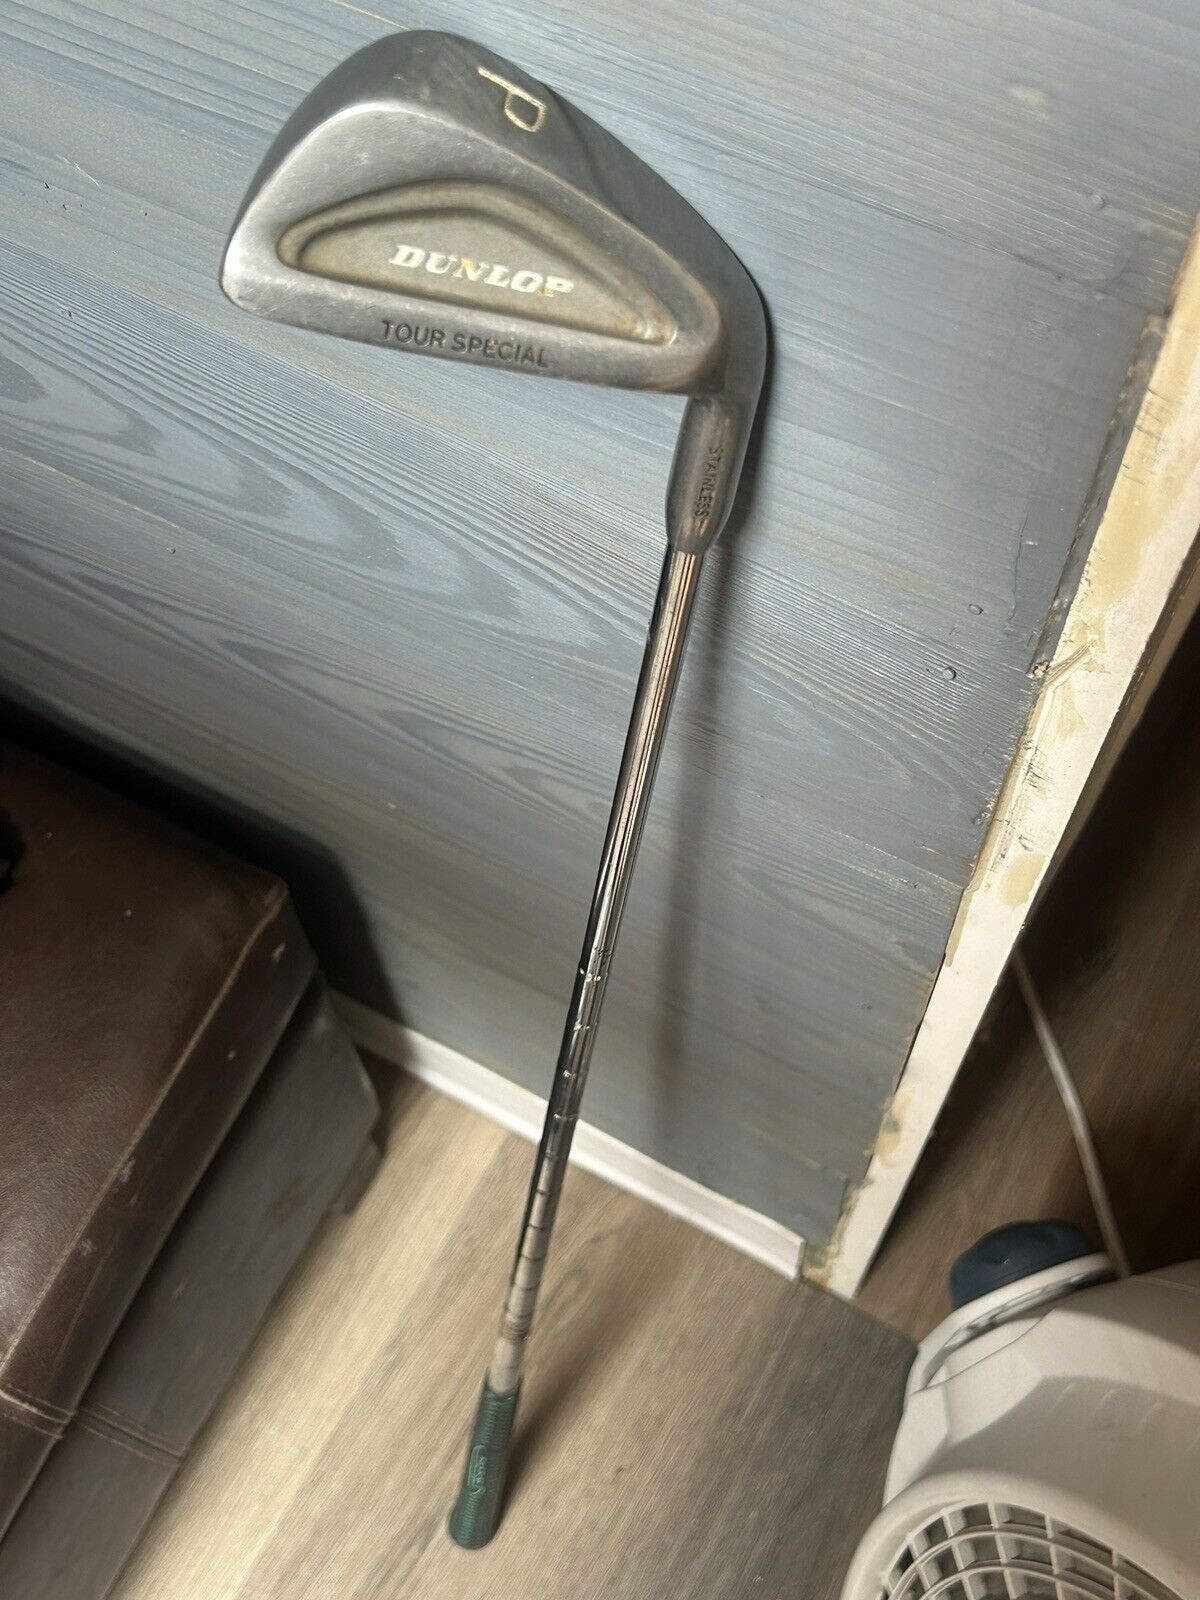 Dunlop Tour Special Stainless Steel Pitching  Wedge  Shaft ~ 36” Swing Rite Grip